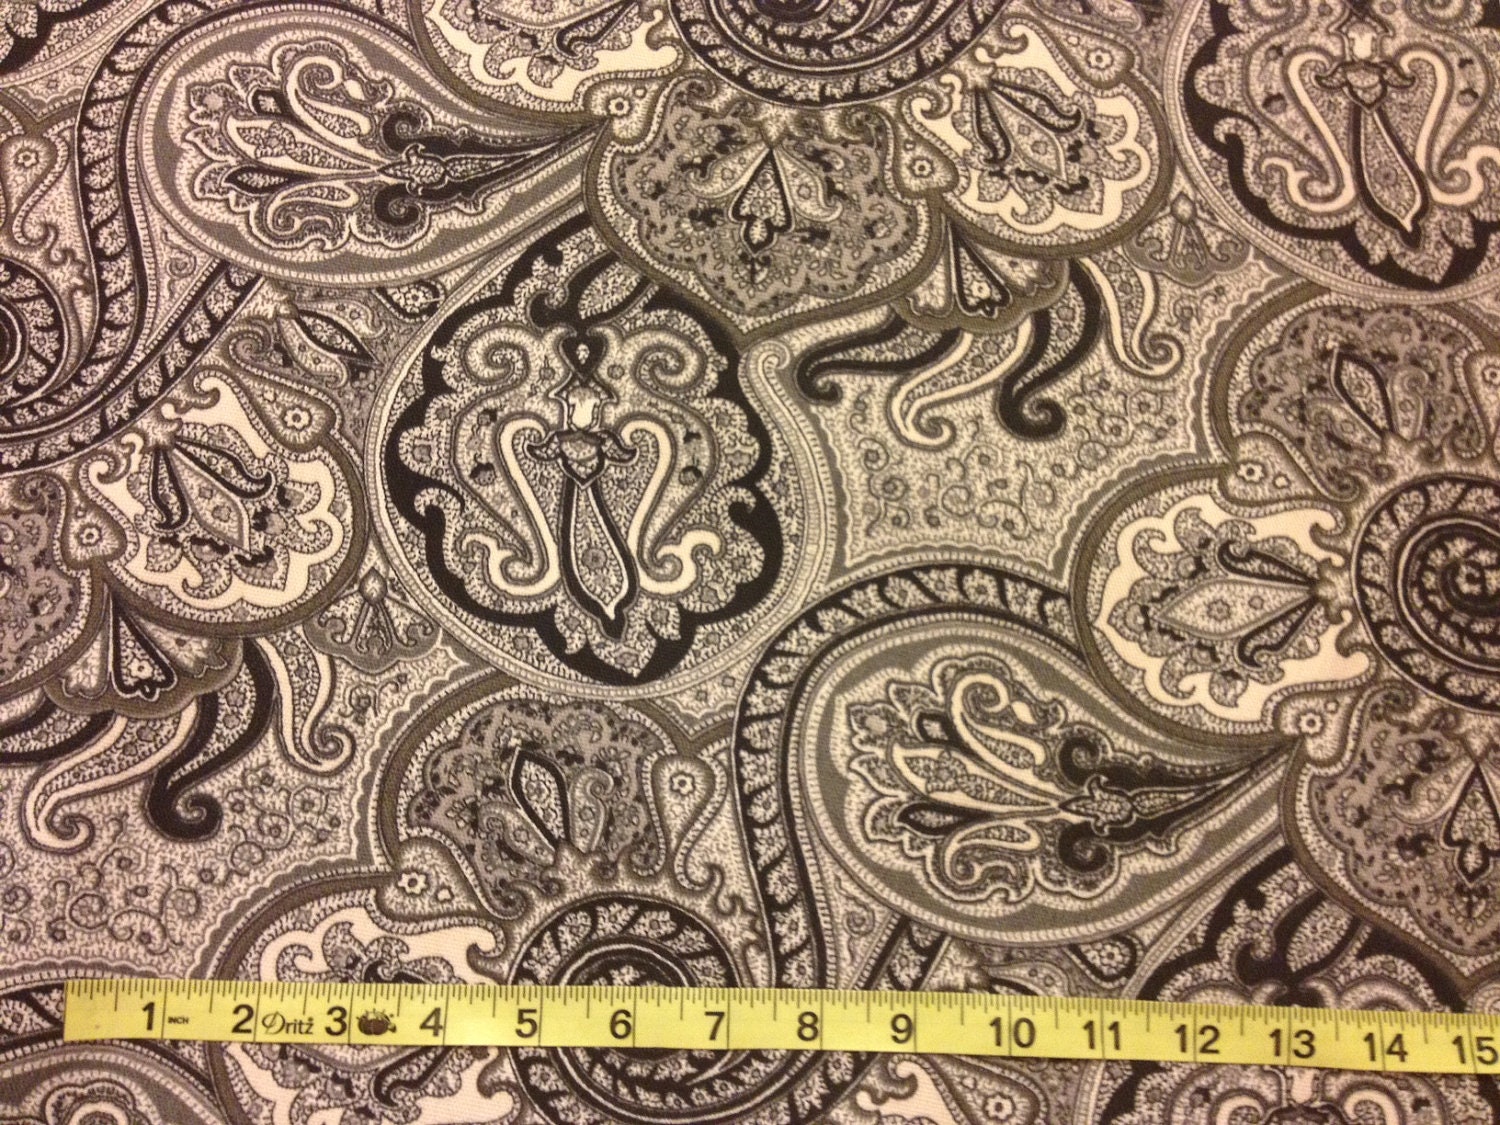 Paisley Home Decor Fabric : Waverly Toraja Bolt End Crimson Red Green Gold Paisley ... - Find thousands of fabrics for home decorating, upholstery and apparel sewing projects.